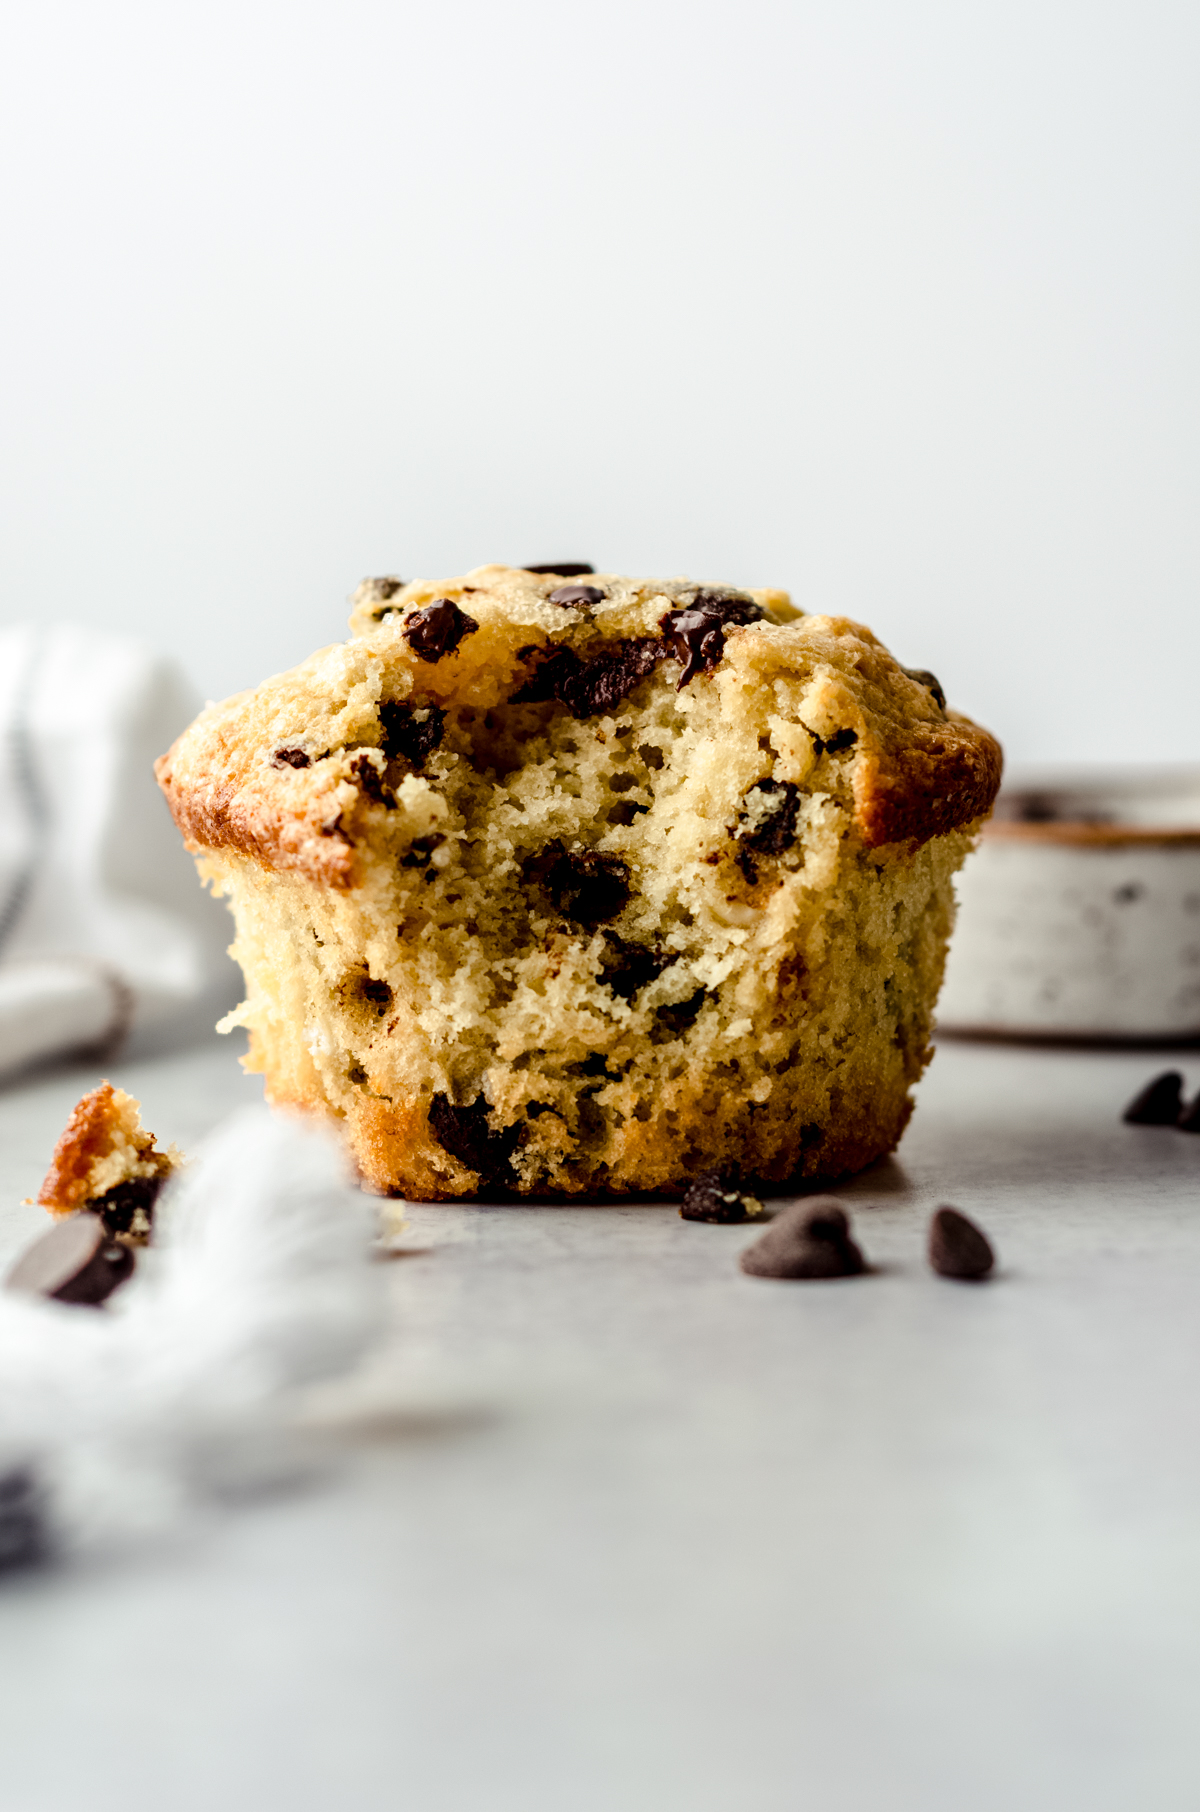 A chocolate chip muffin with a bite taken out of it.